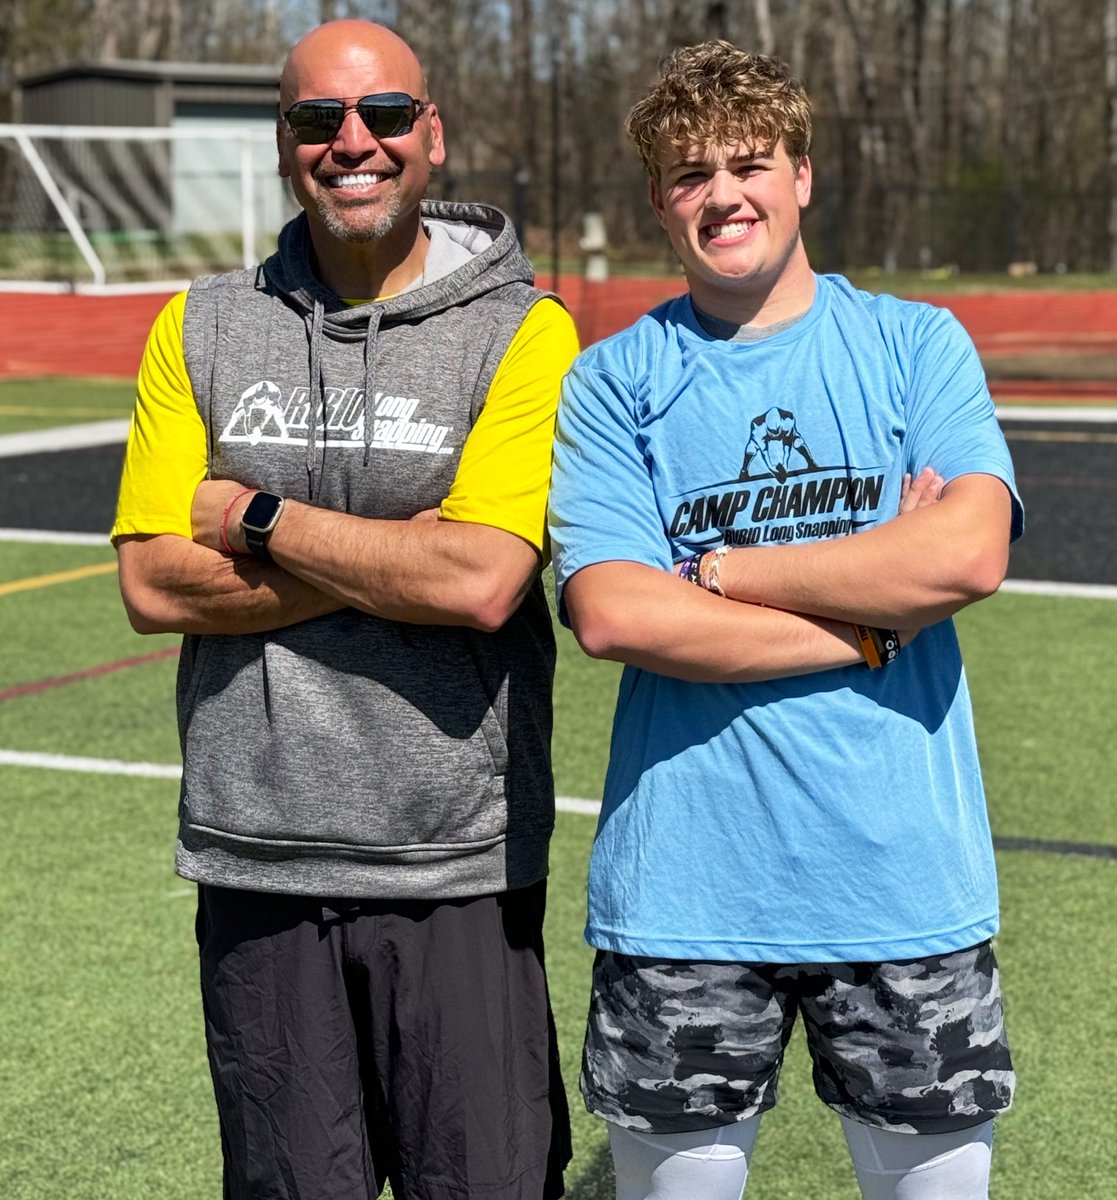 Rubio Long Snapping is proud to announce that Sam Aschbrenner (NC, 2025) is the overall champion at the NC spring camp! Next stops for Rubio Long Snapping: March 17 in Atlanta April 7 in Nashville April 14 in Chicago April 21 in New Jersey April 21 in San Francisco April…